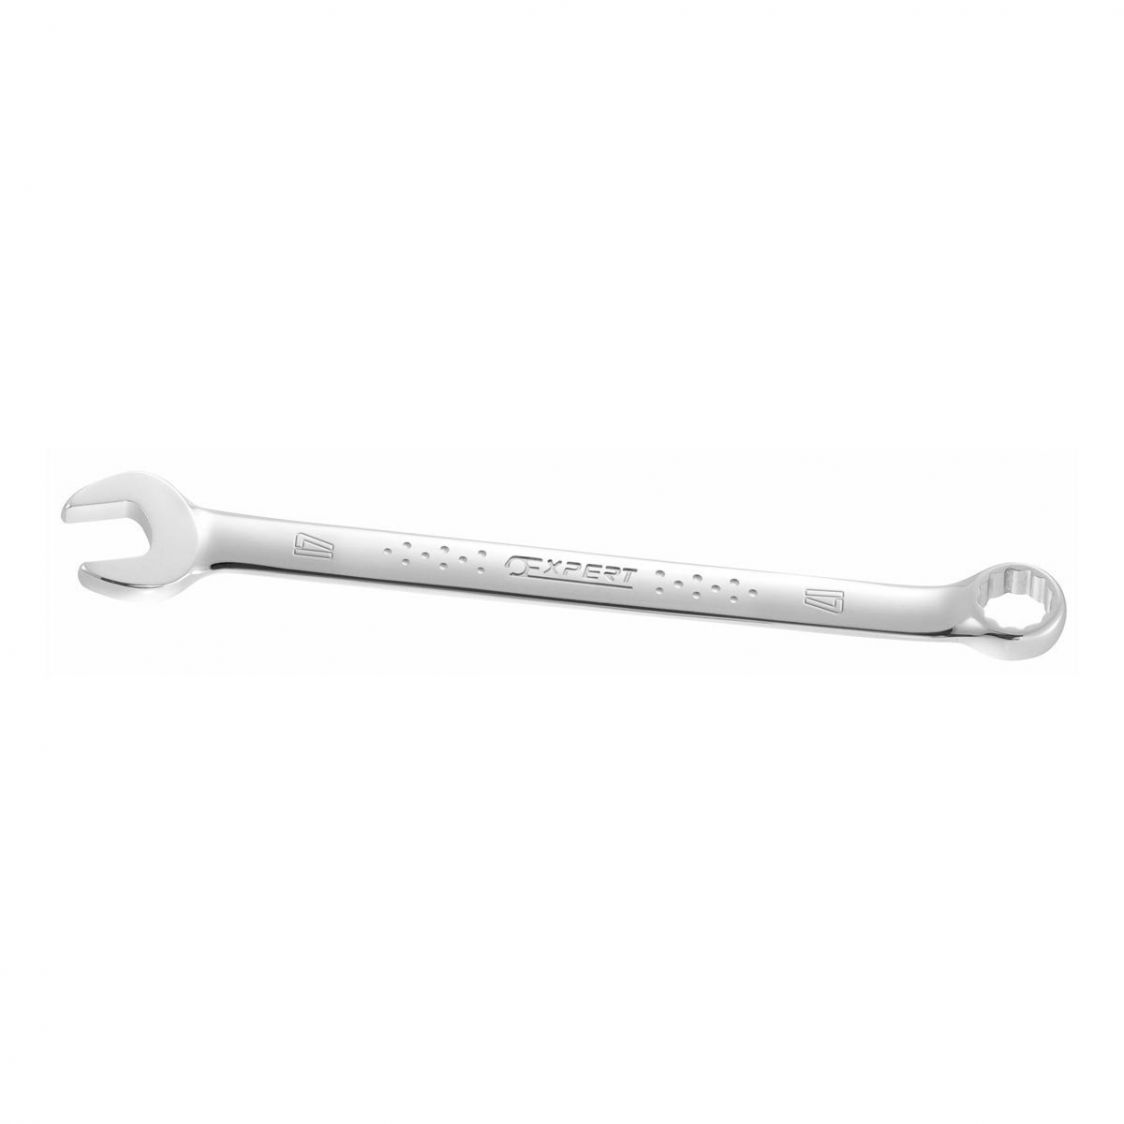 EXPERT by FACOM E110704 - 11mm Metric Long Combination Spanner